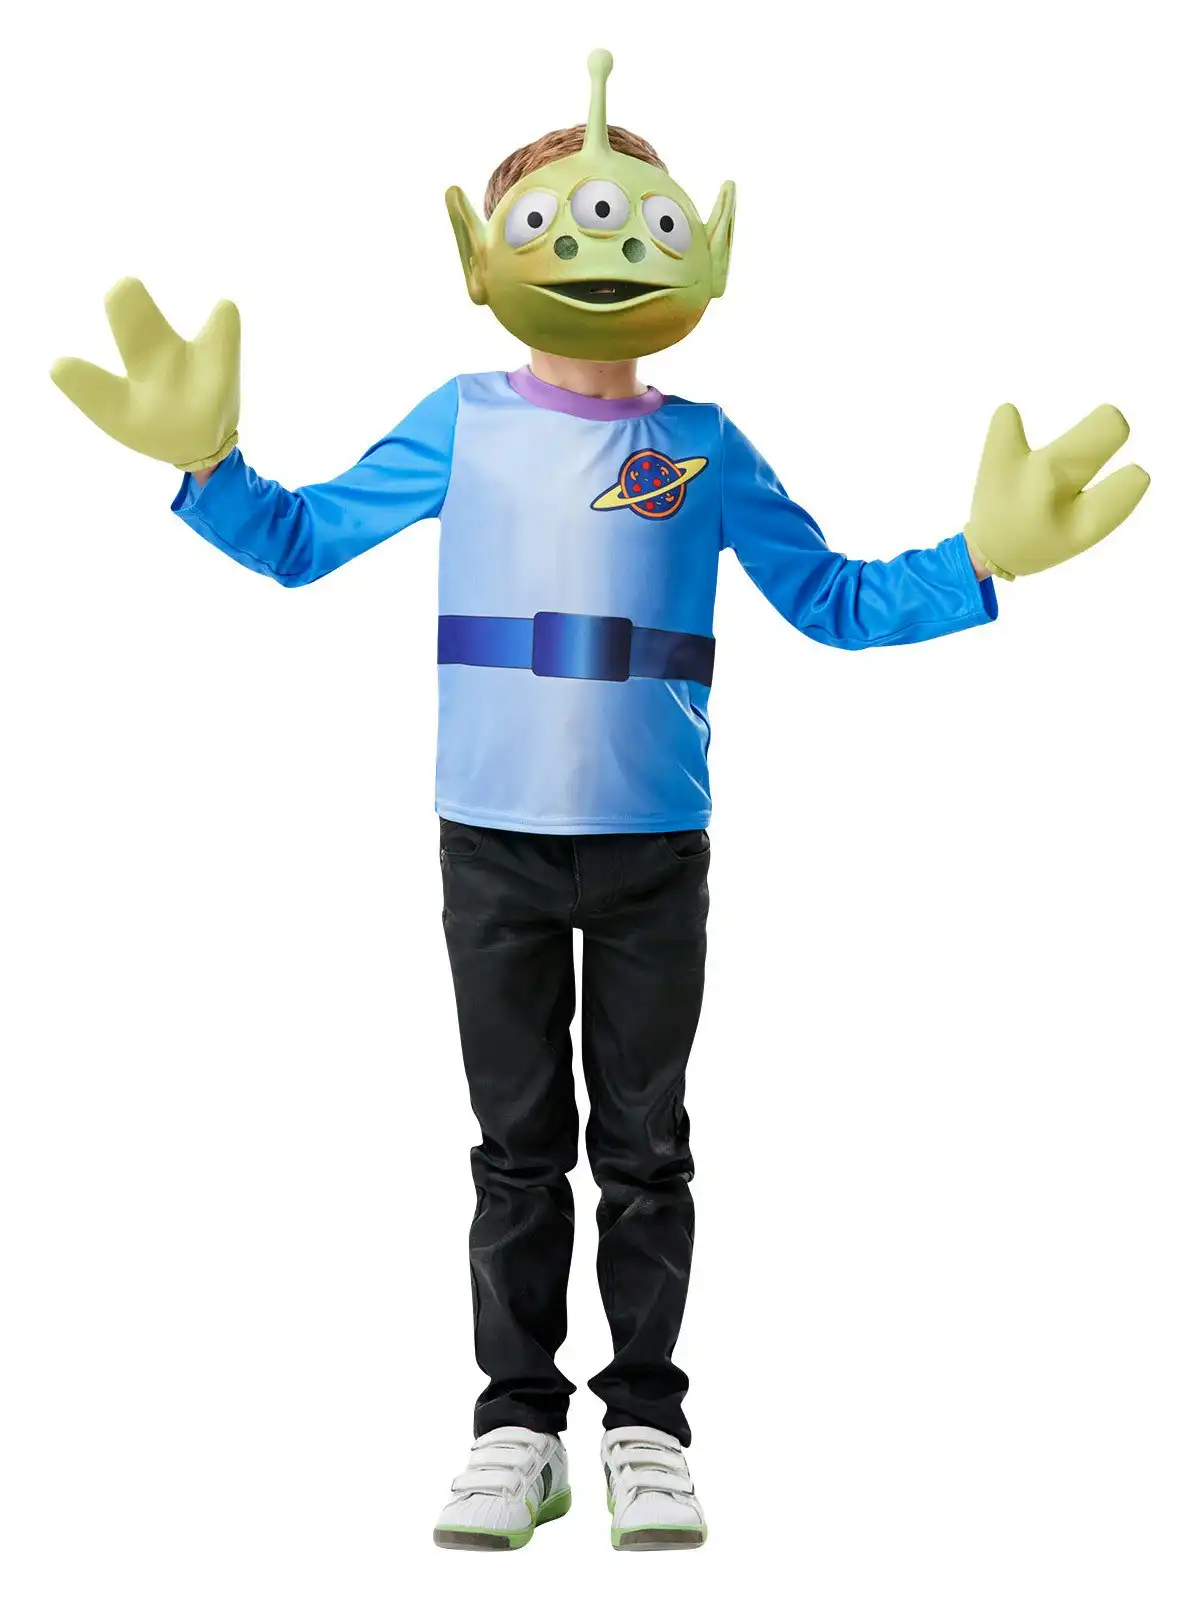 Disney Pixar Alien Character Toy Story 4 Dress Up Party Costume Size Kids 3-6yrs